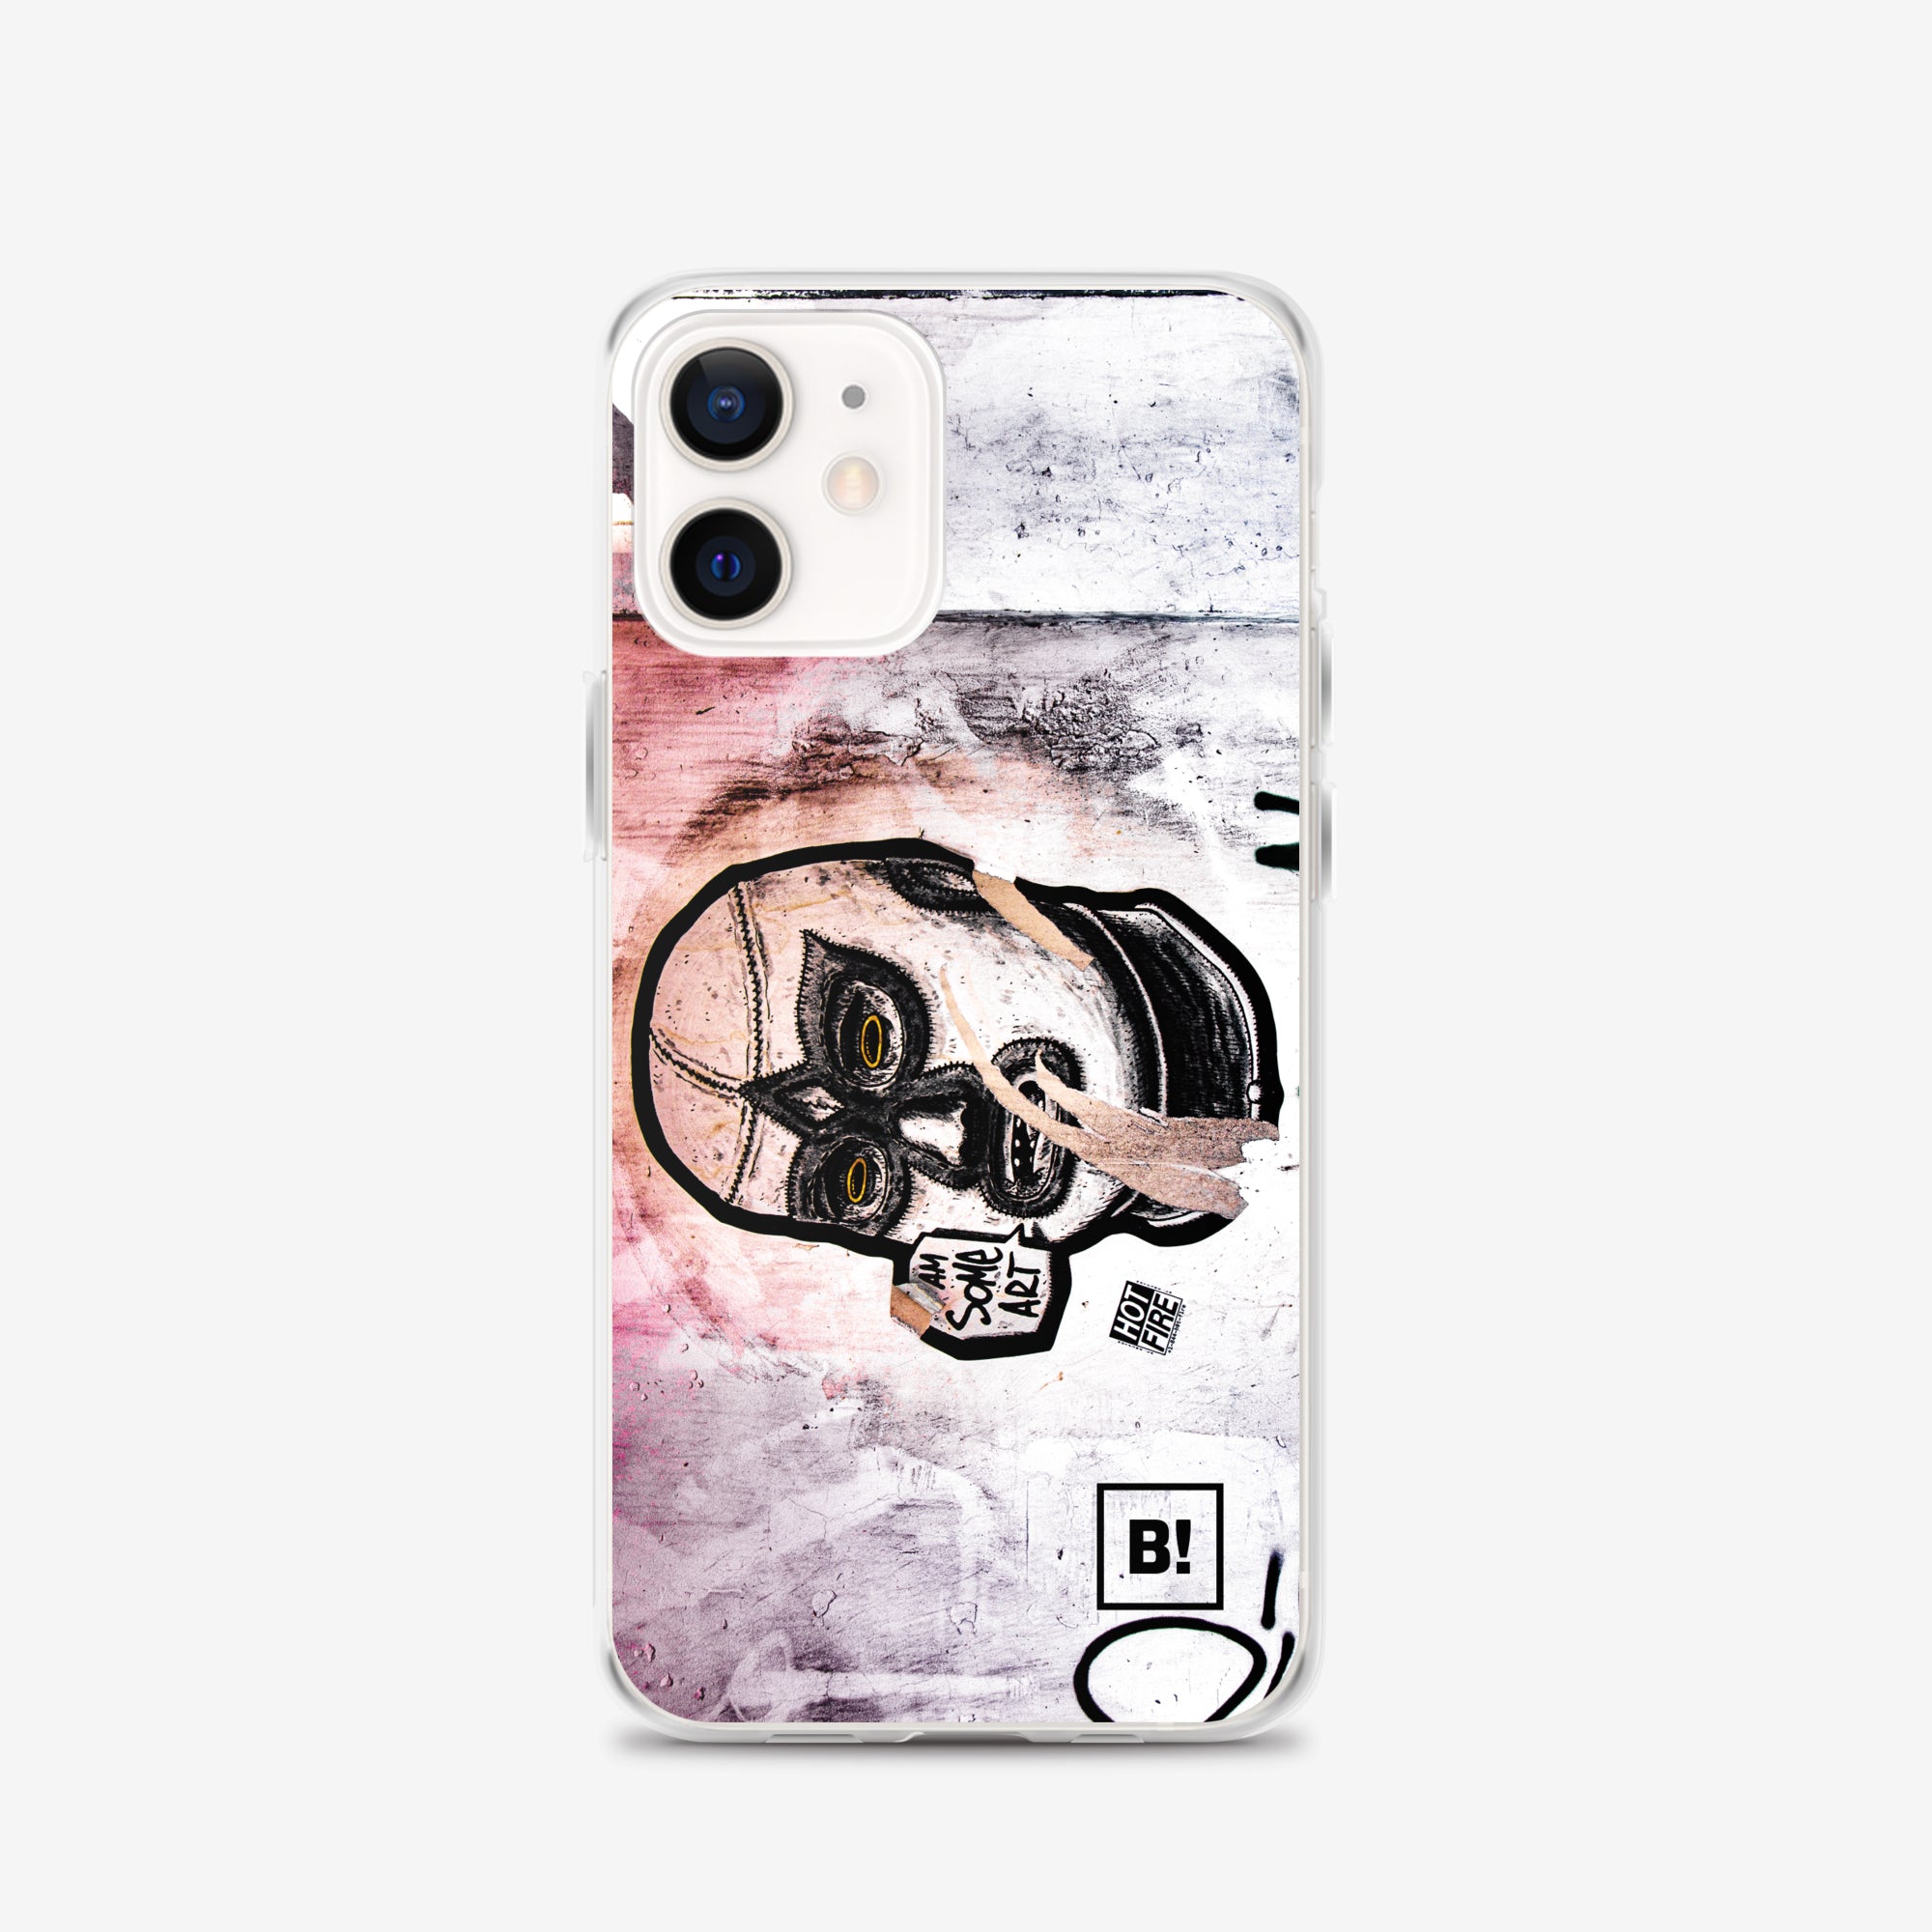 Binspired Am Some Art iPhone 12 Clear Case